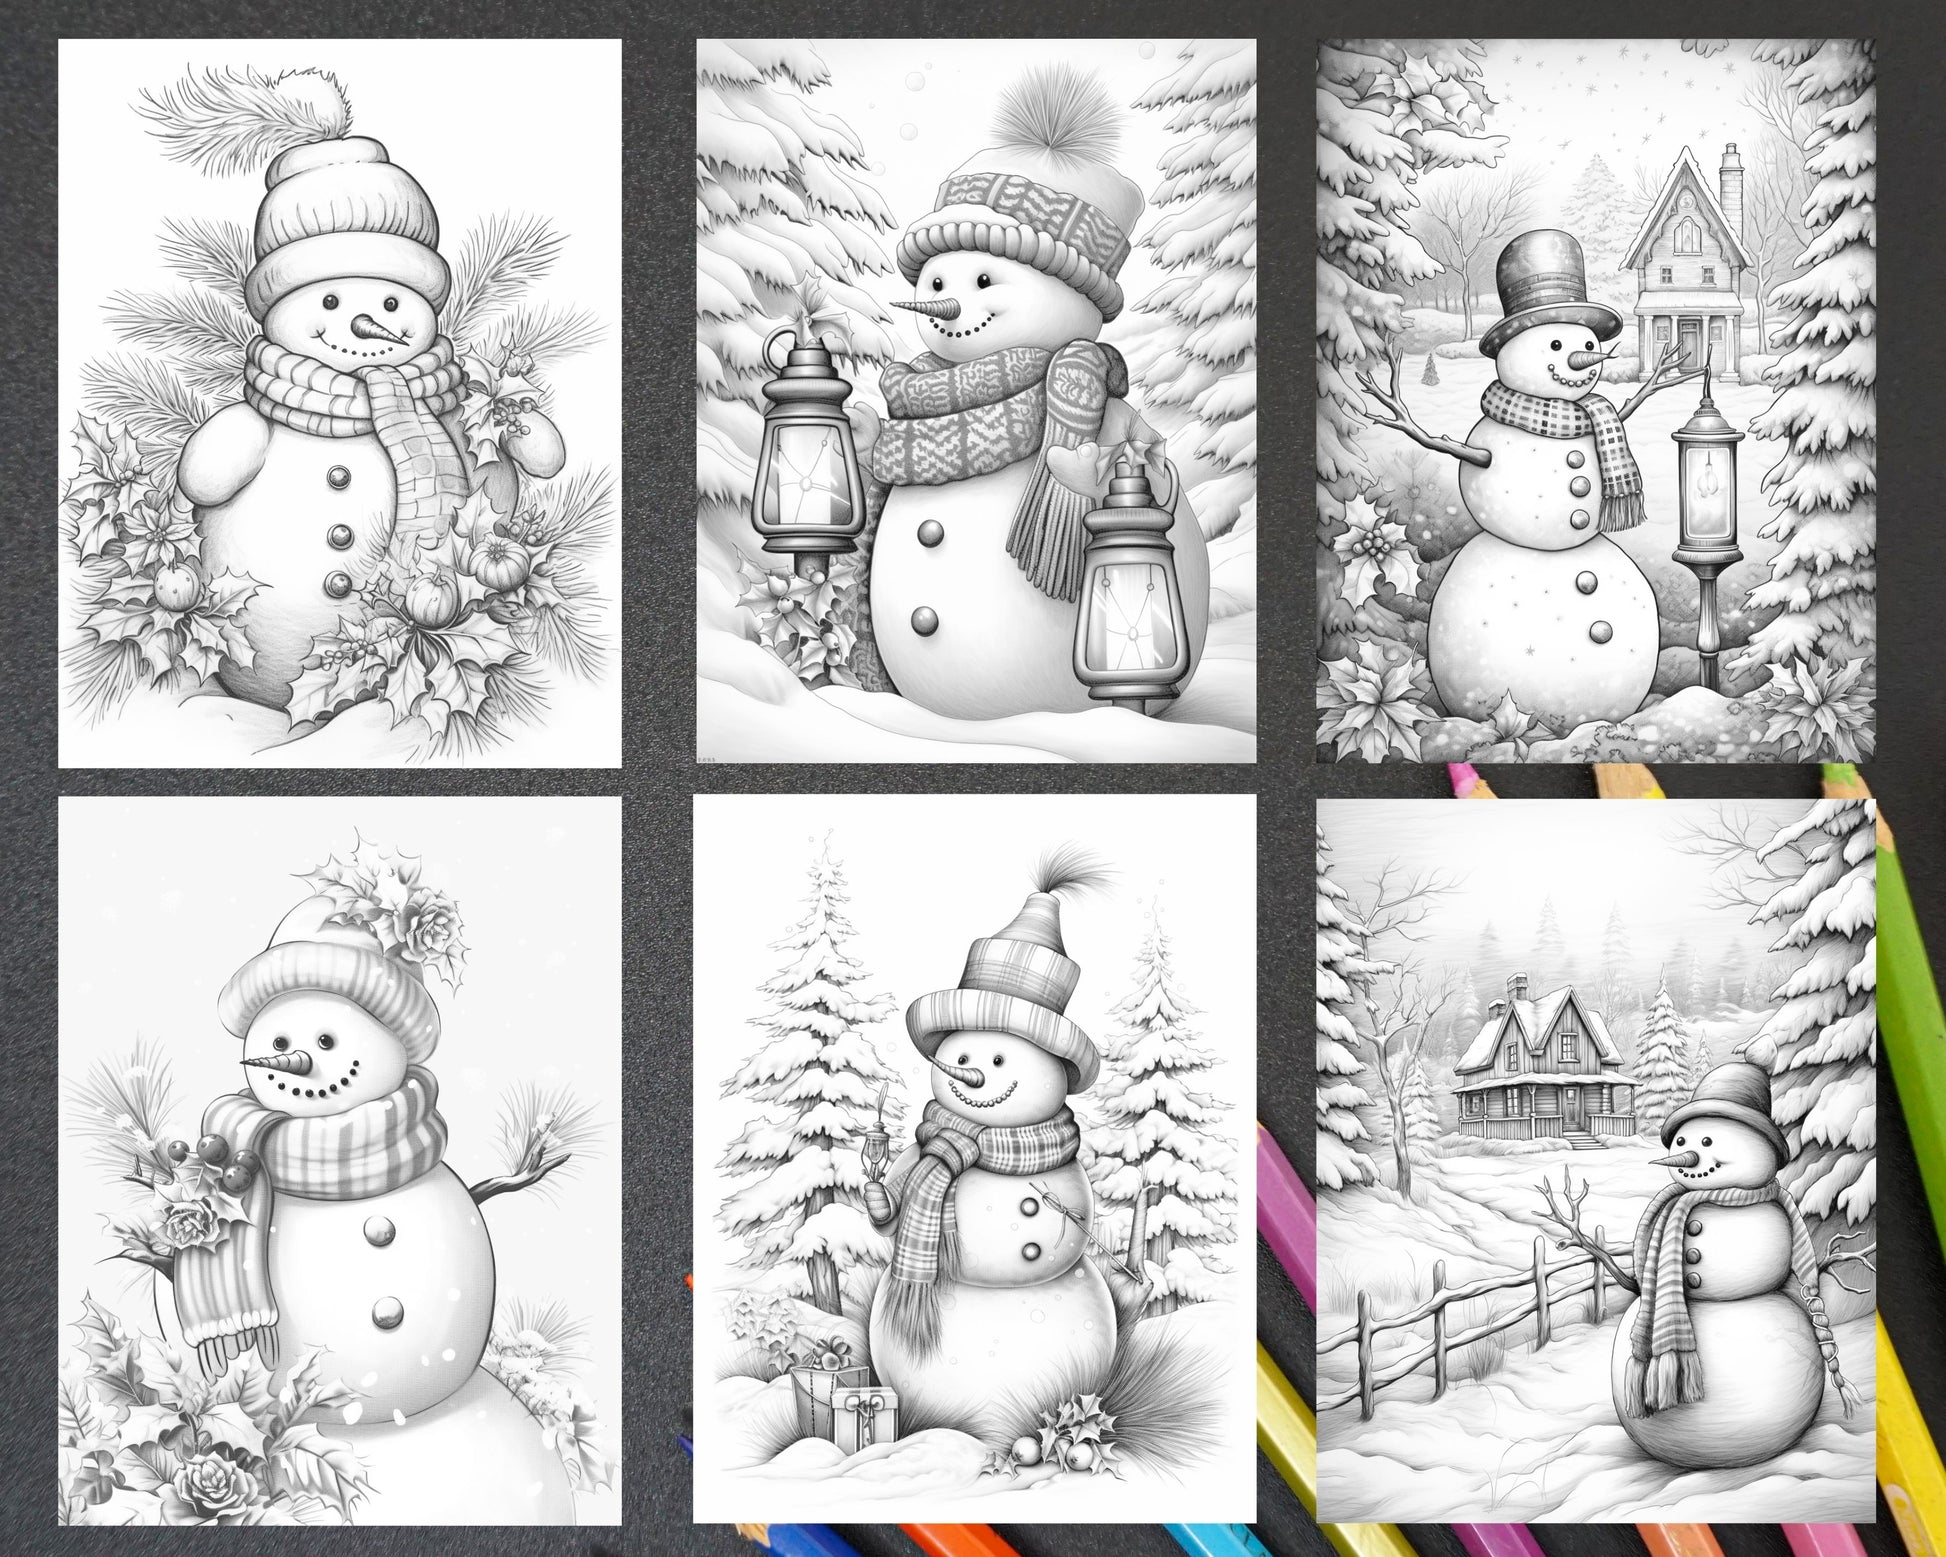 Christmas Snowman Coloring Page, Winter Holiday Coloring Book Printable, Relaxing Coloring Pages, Christmas Coloring Sheets, Christmas Coloring Book Printable, Xmas Coloring Pages, Holiday Coloring Pages, Winter Coloring Pages for Adults